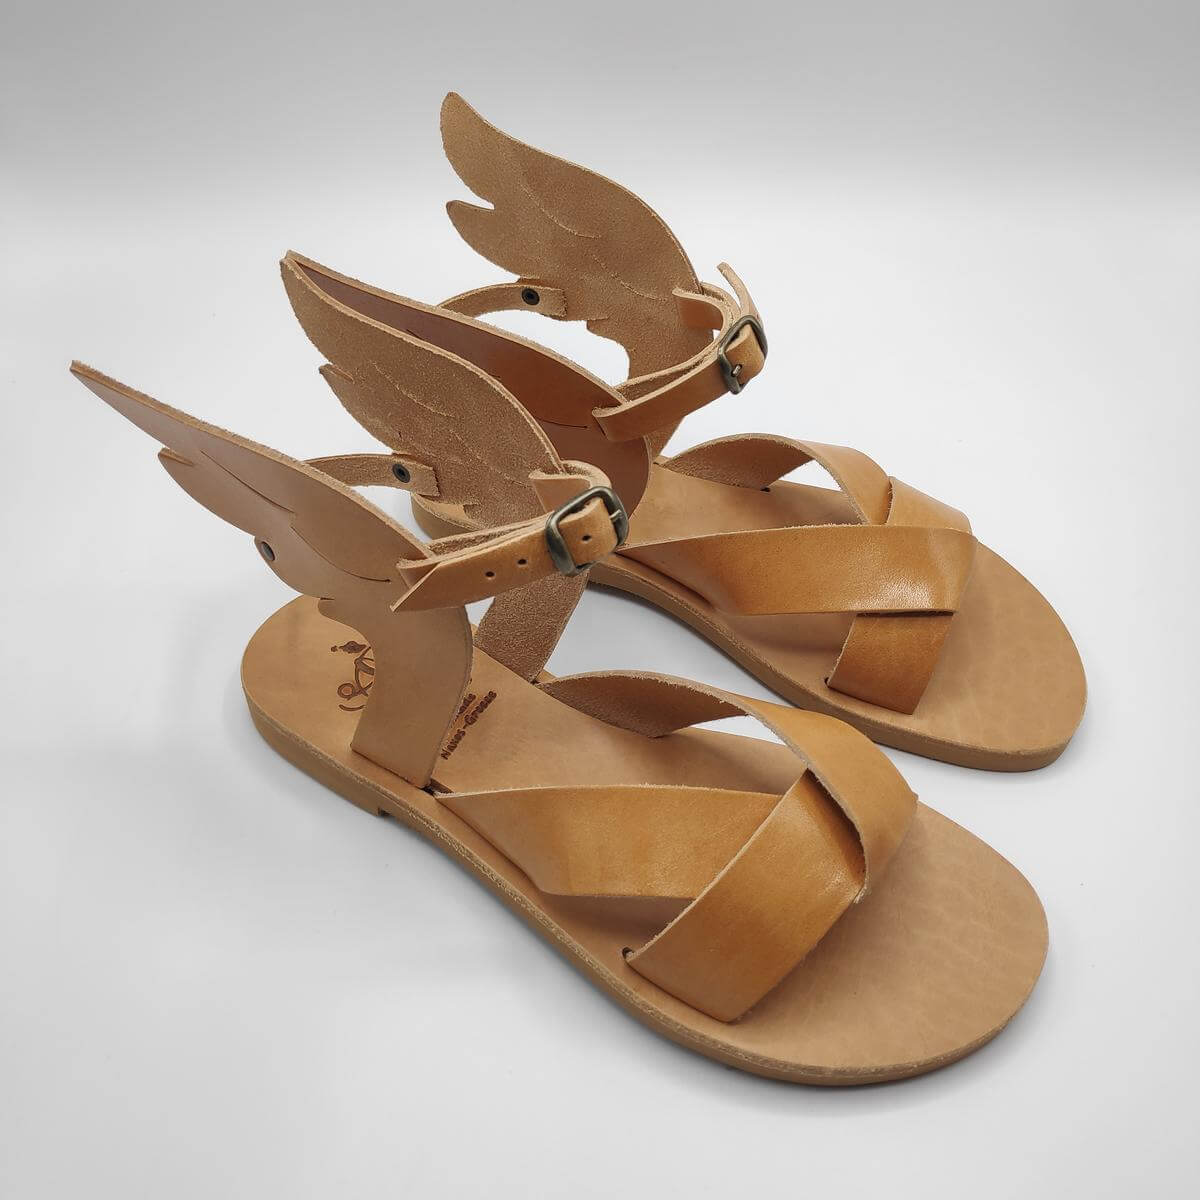 naturals sandals with wings